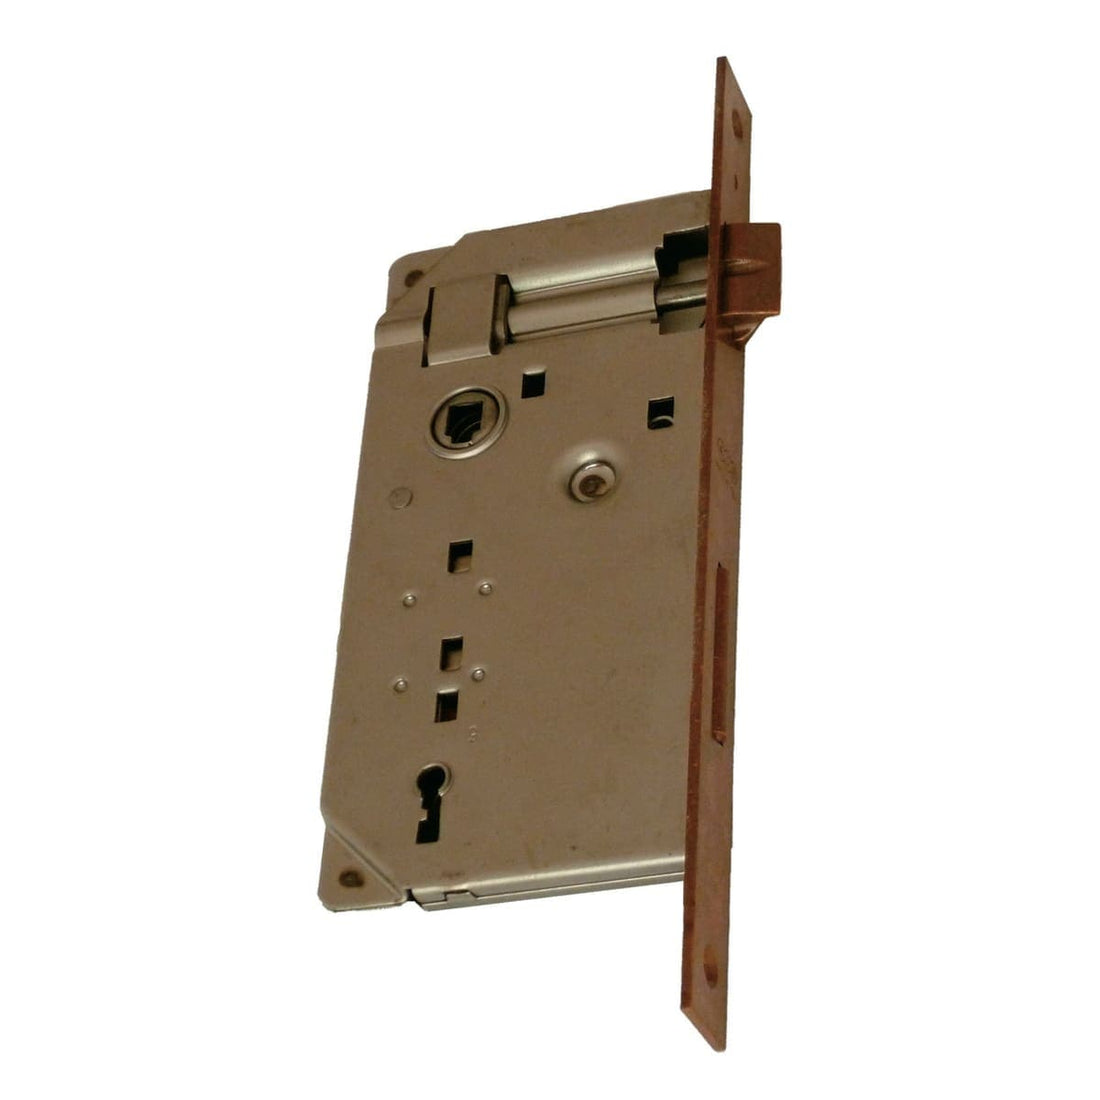 PATENT LOCK F22 CENTRE DISTANCE 90 MM ENTRY 50 MM BRONZE-PLATED STEEL SQUARE EDGE